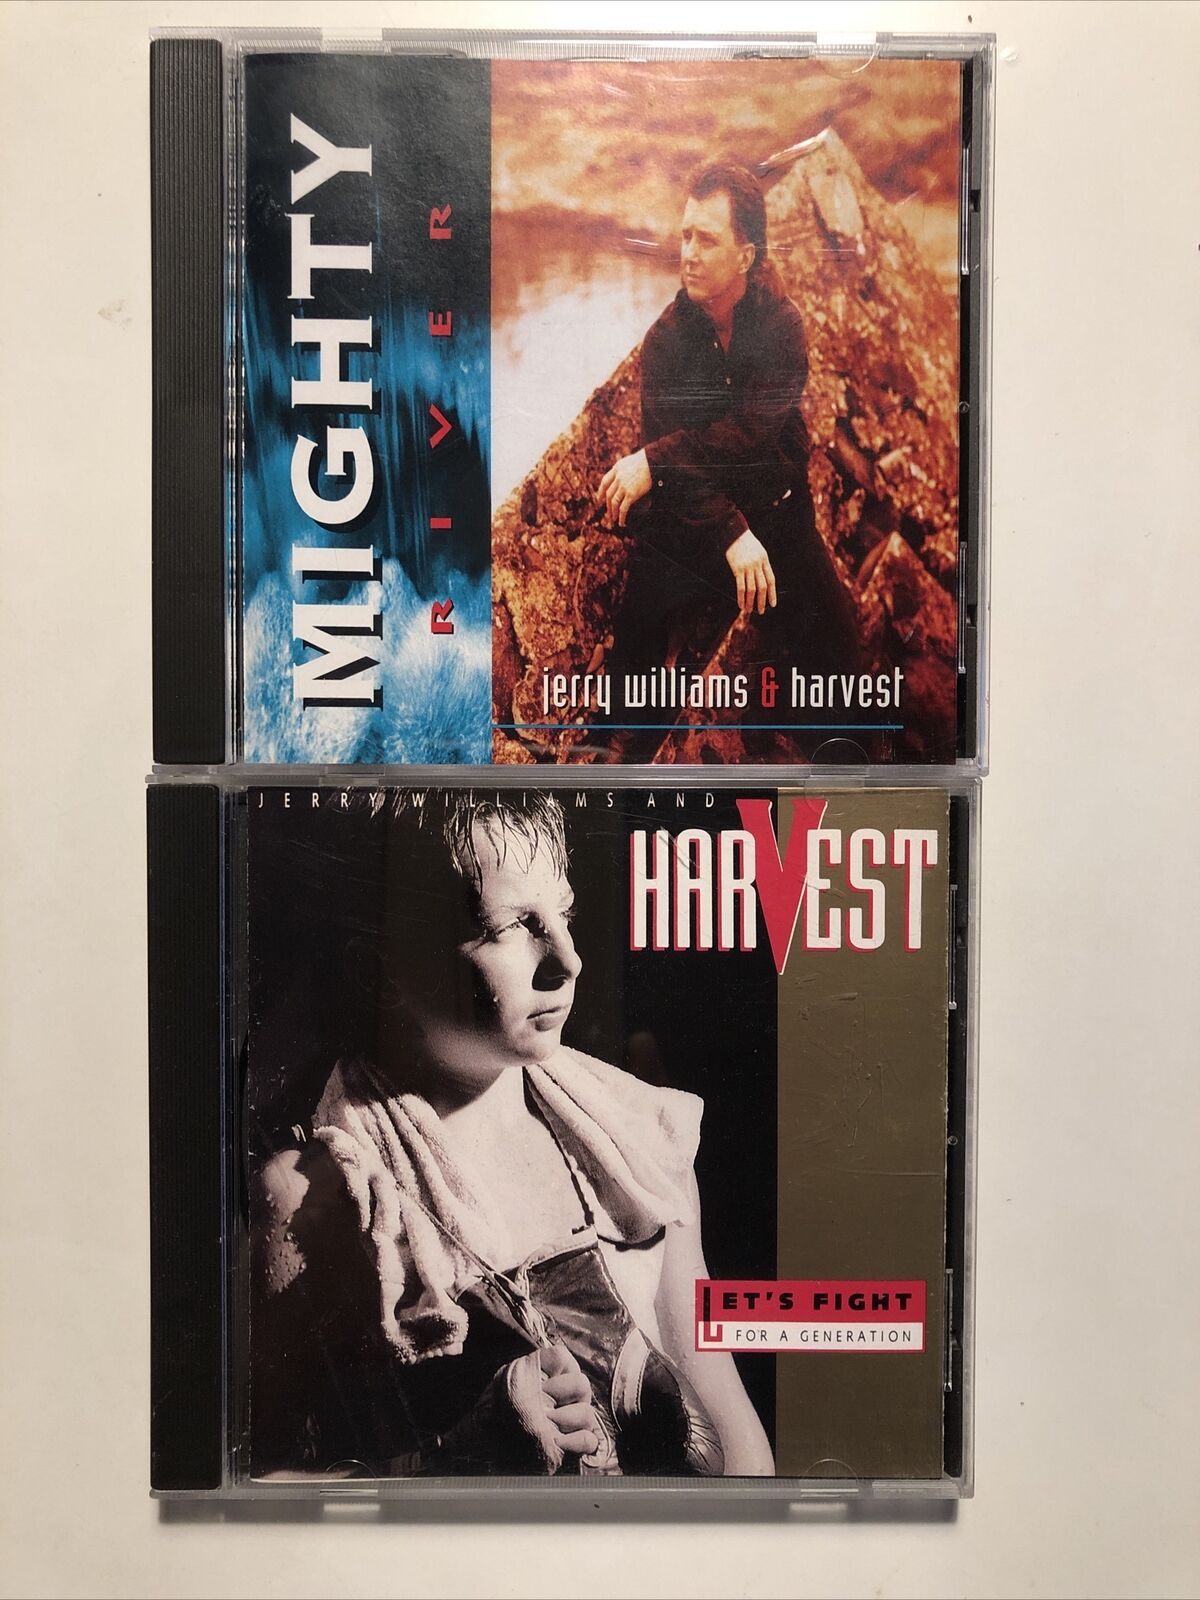 2 CD LOT JERRY WILLIAMS & HARVEST - MIGHTY RIVER / LET\'S FIGHT FOR A GENERATION